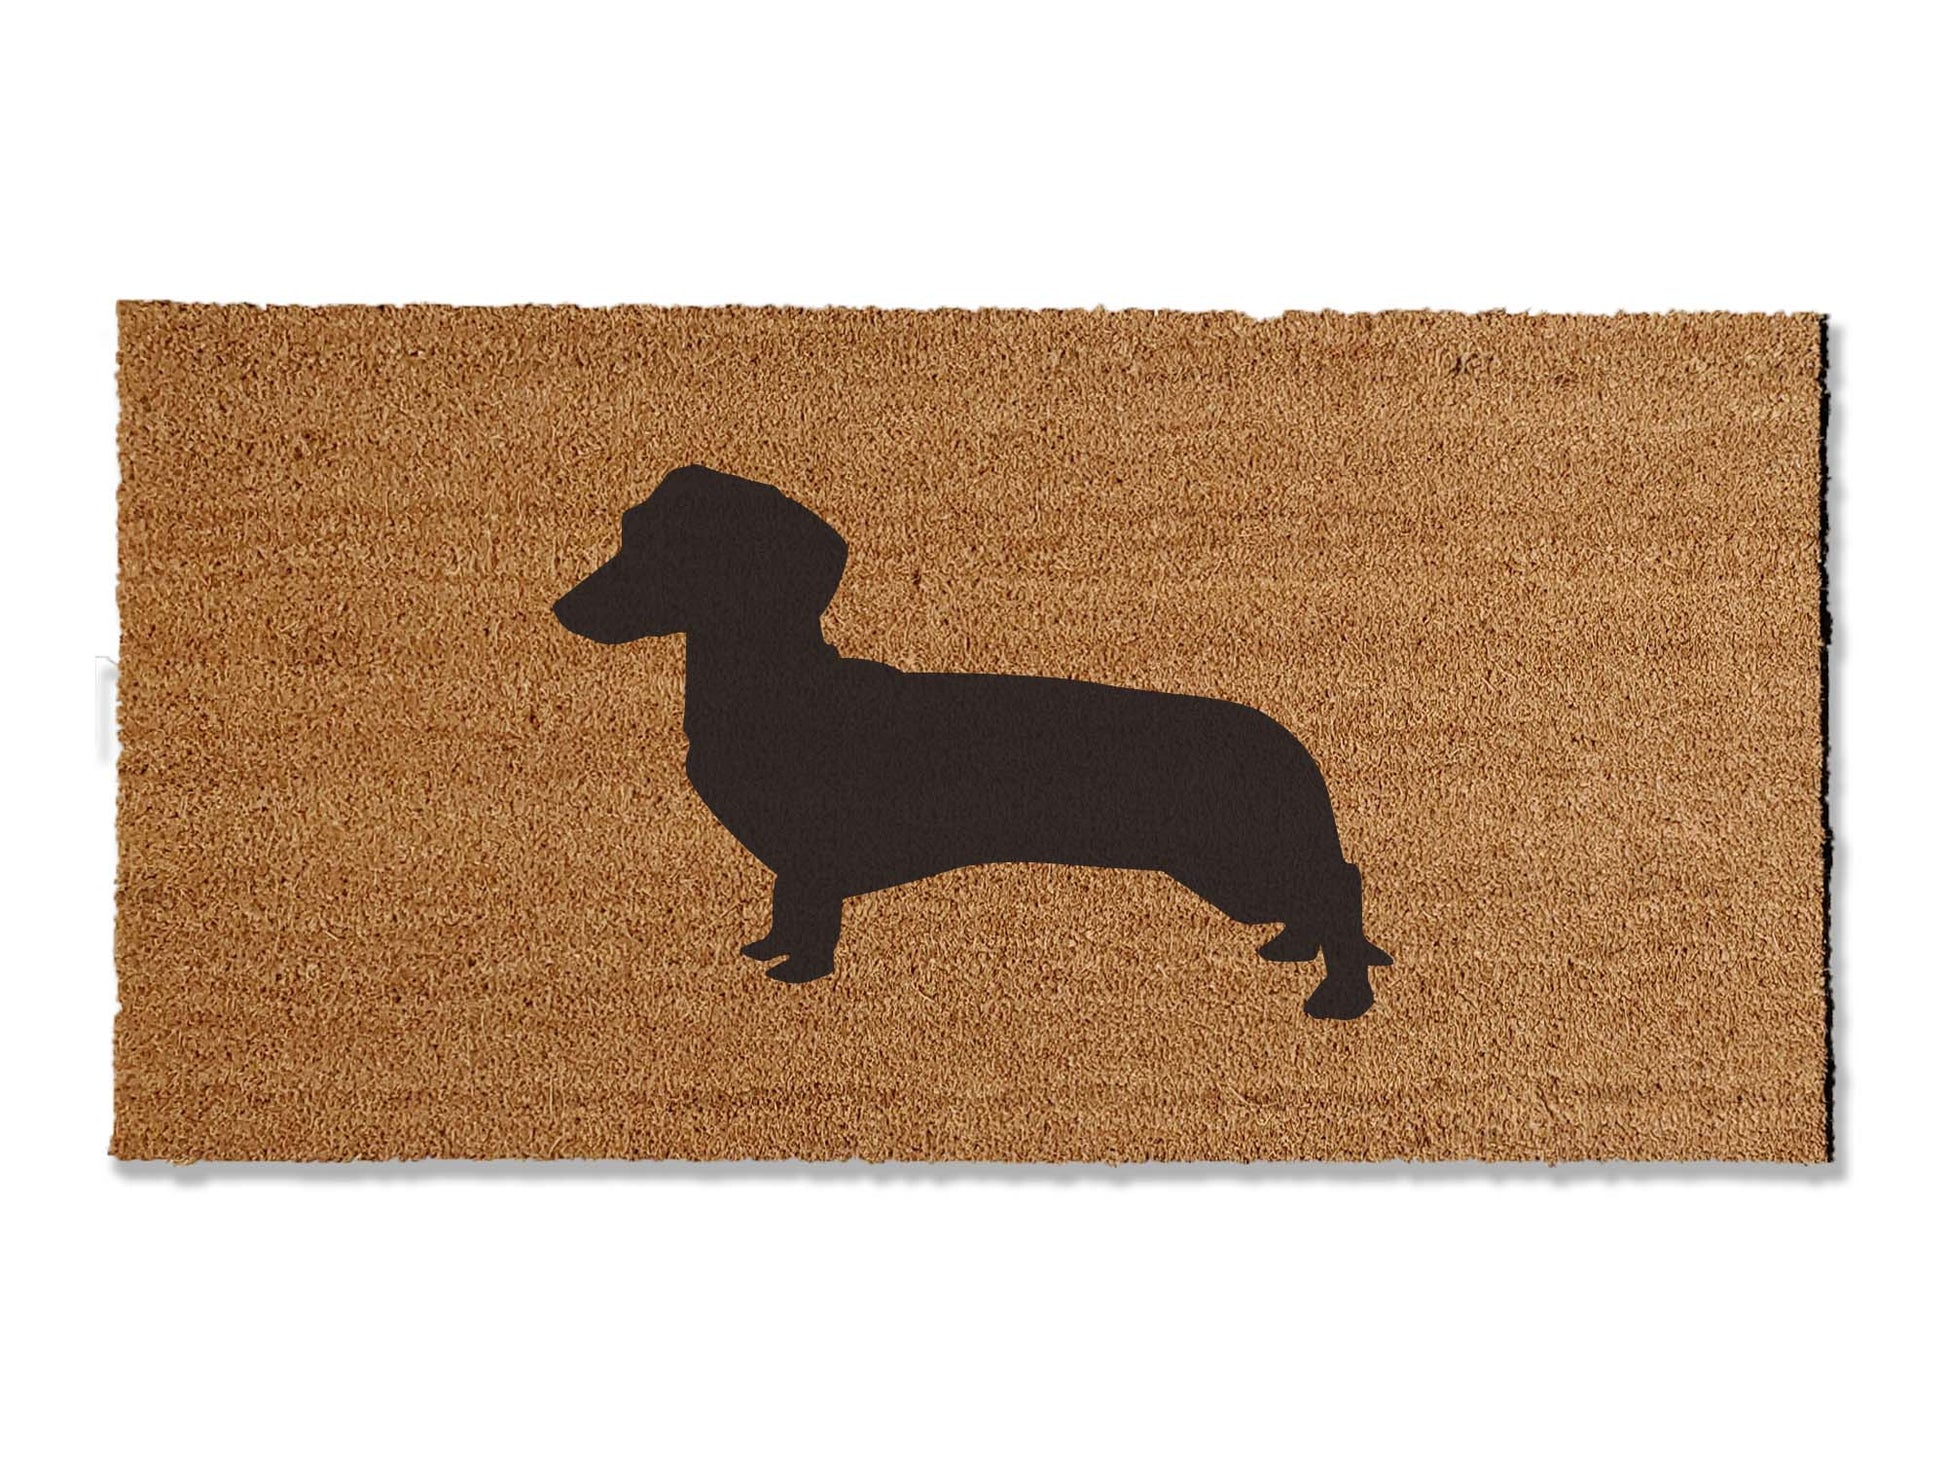 Elevate your entryway with our charming coir welcome doormat featuring an adorable Dachshund Dog design. Available in multiple sizes, it's the perfect gift for dog lovers, adding a delightful touch to your home's first impression.